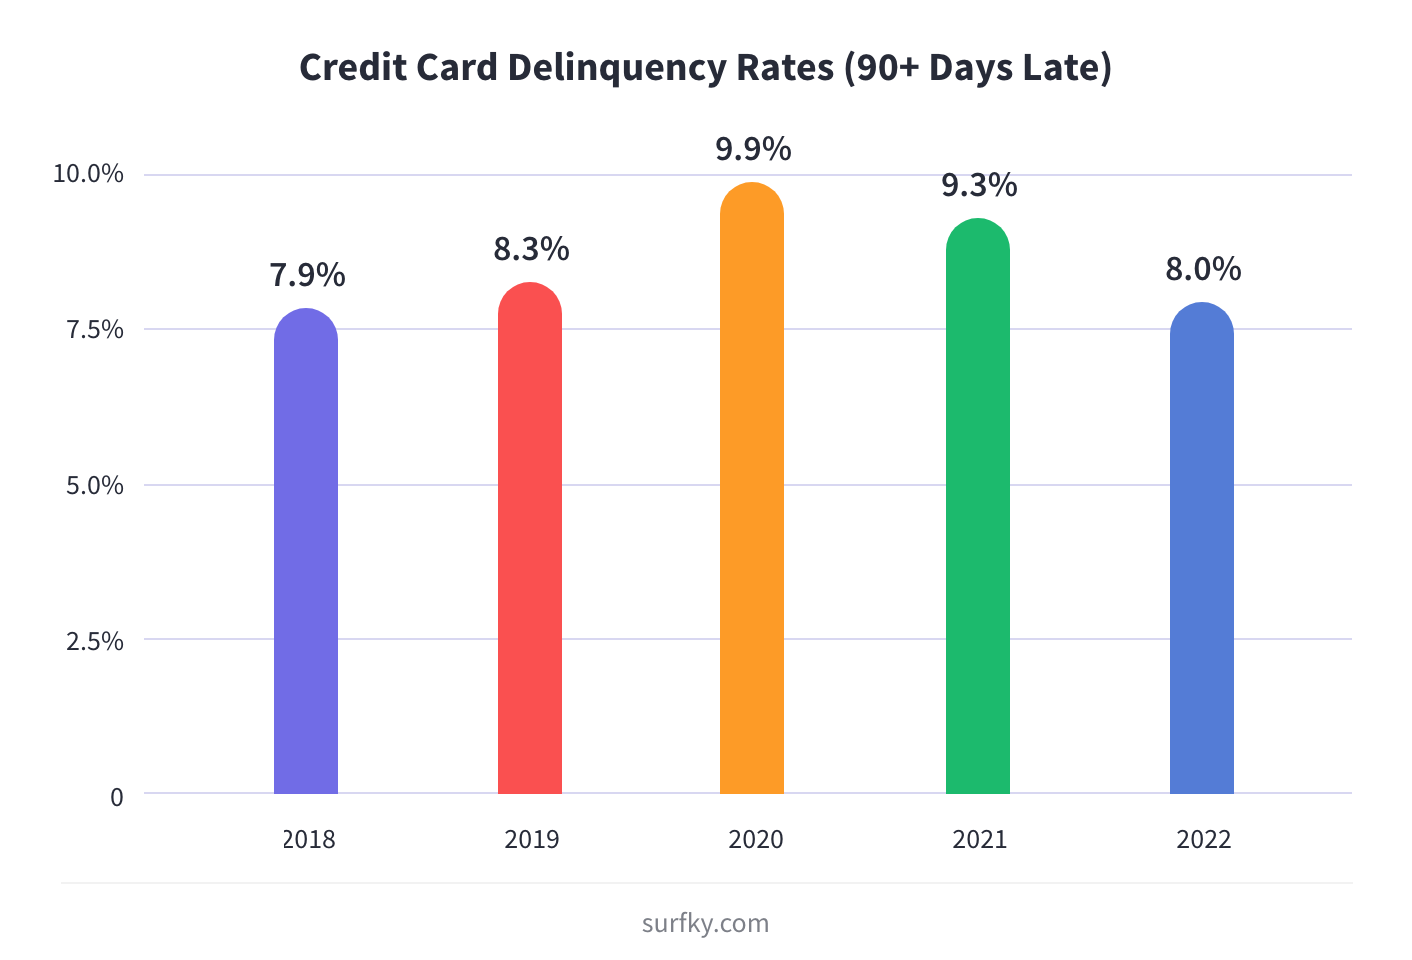 credit card delinquency rates 90+ days late bar chart 2018-2022